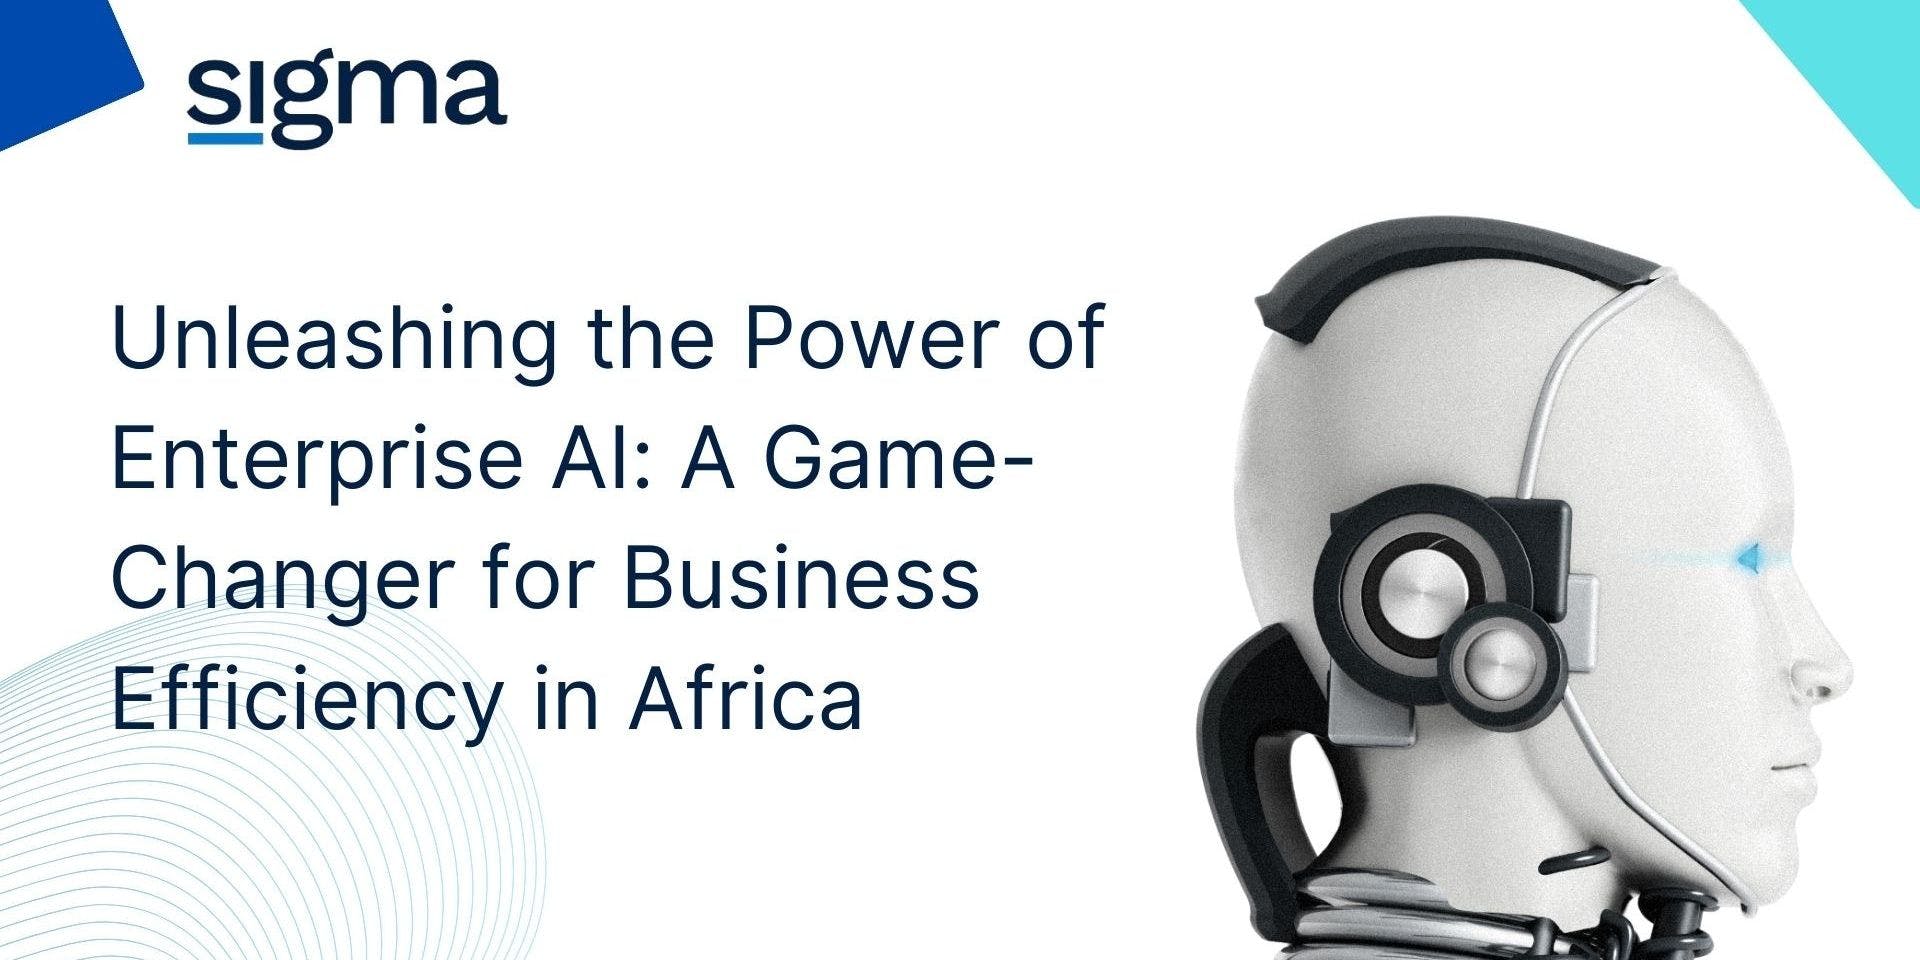 Cover Image for Improving Business Efficiency in Africa with Enterprise AI